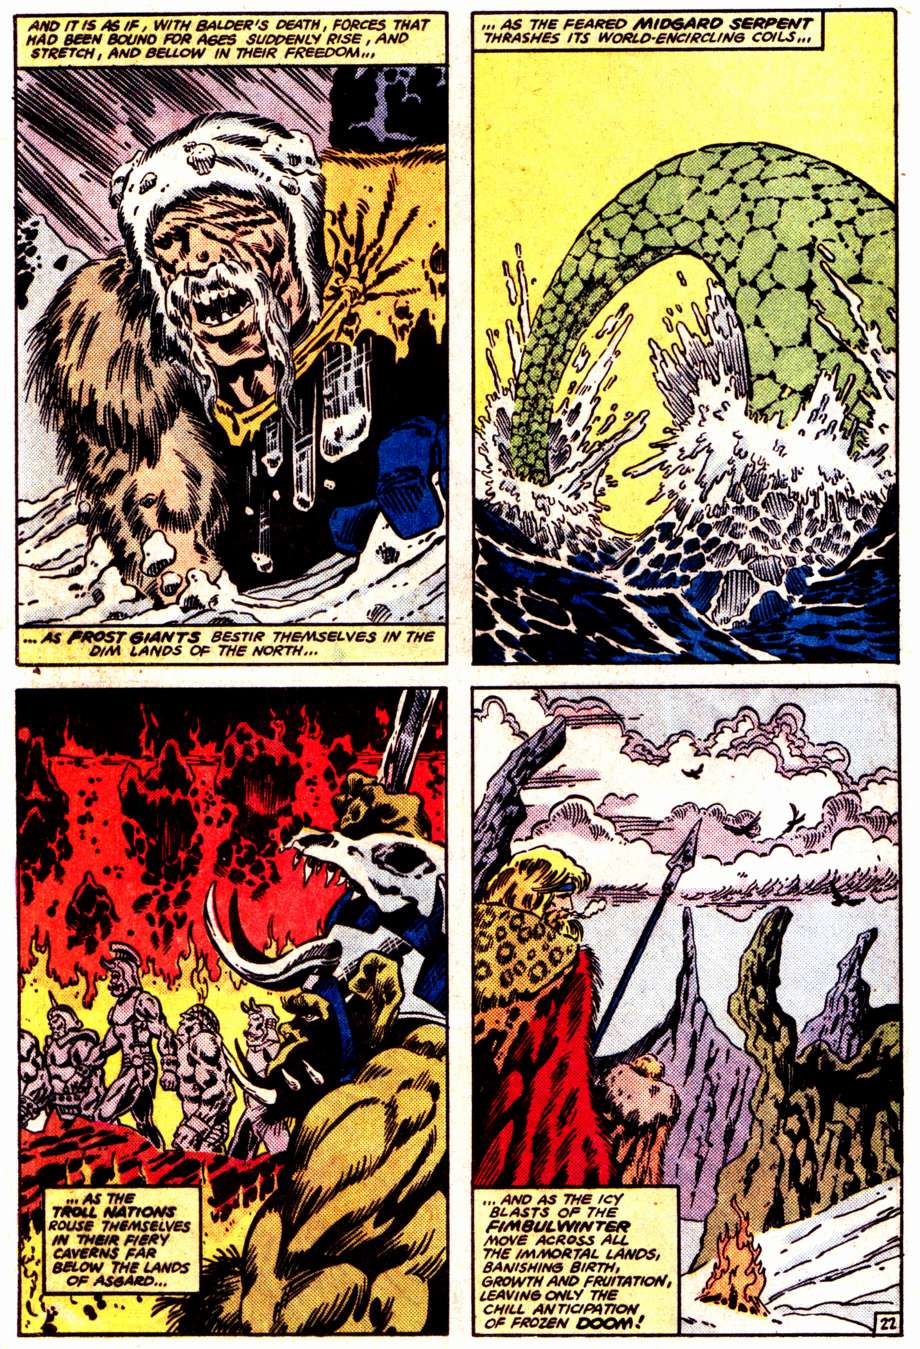 What If? (1977) issue 47 - Loki had found The hammer of Thor - Page 23